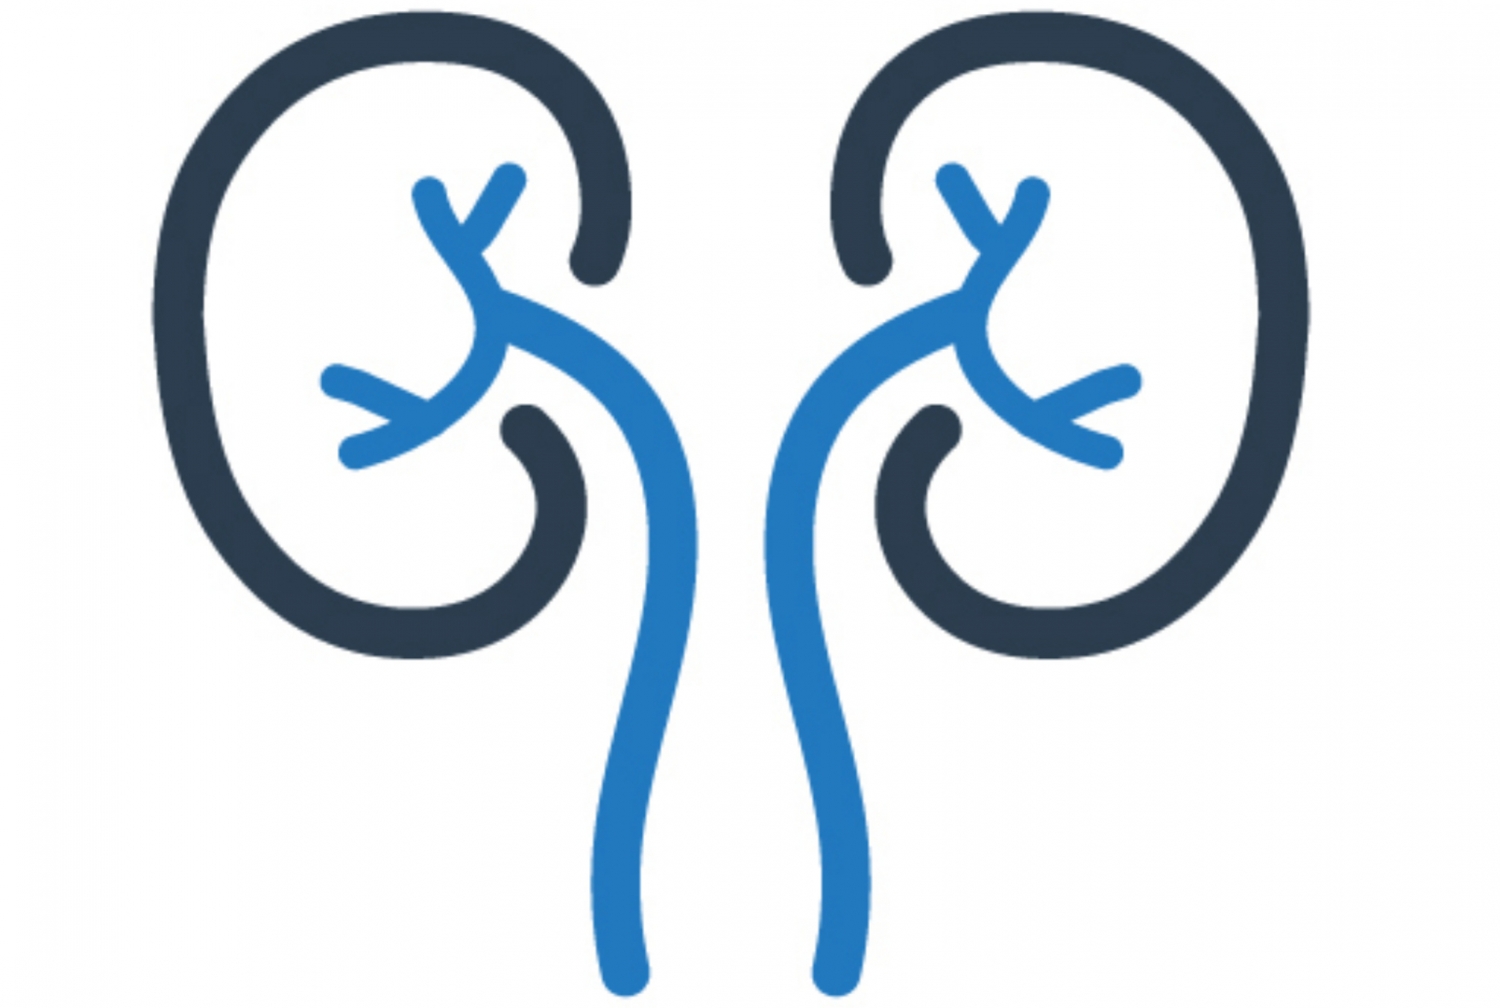 A graphic of the kidneys